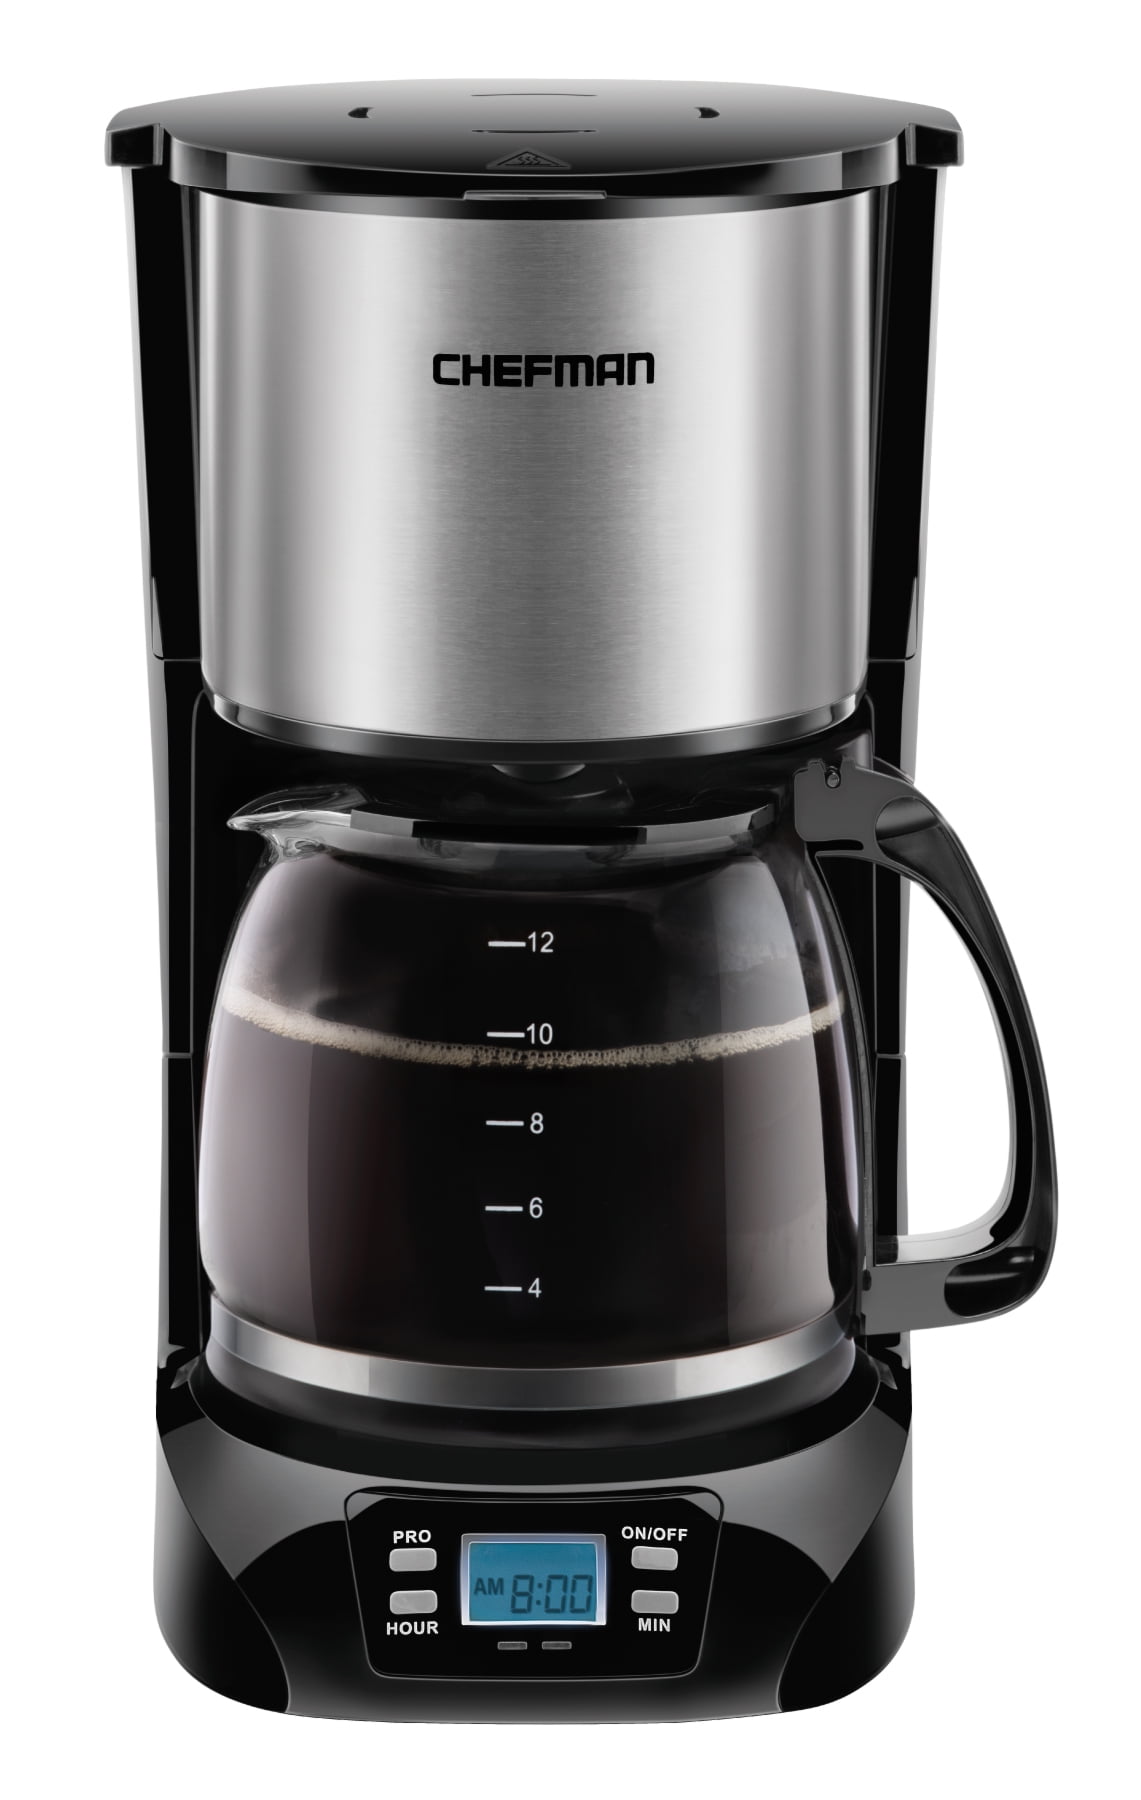 Walmart Johnson City - Browns Mill Rd - Are you looking for a new coffee pot  to refresh your kitchen space? We have what you need with a Farberware dual  brew coffee